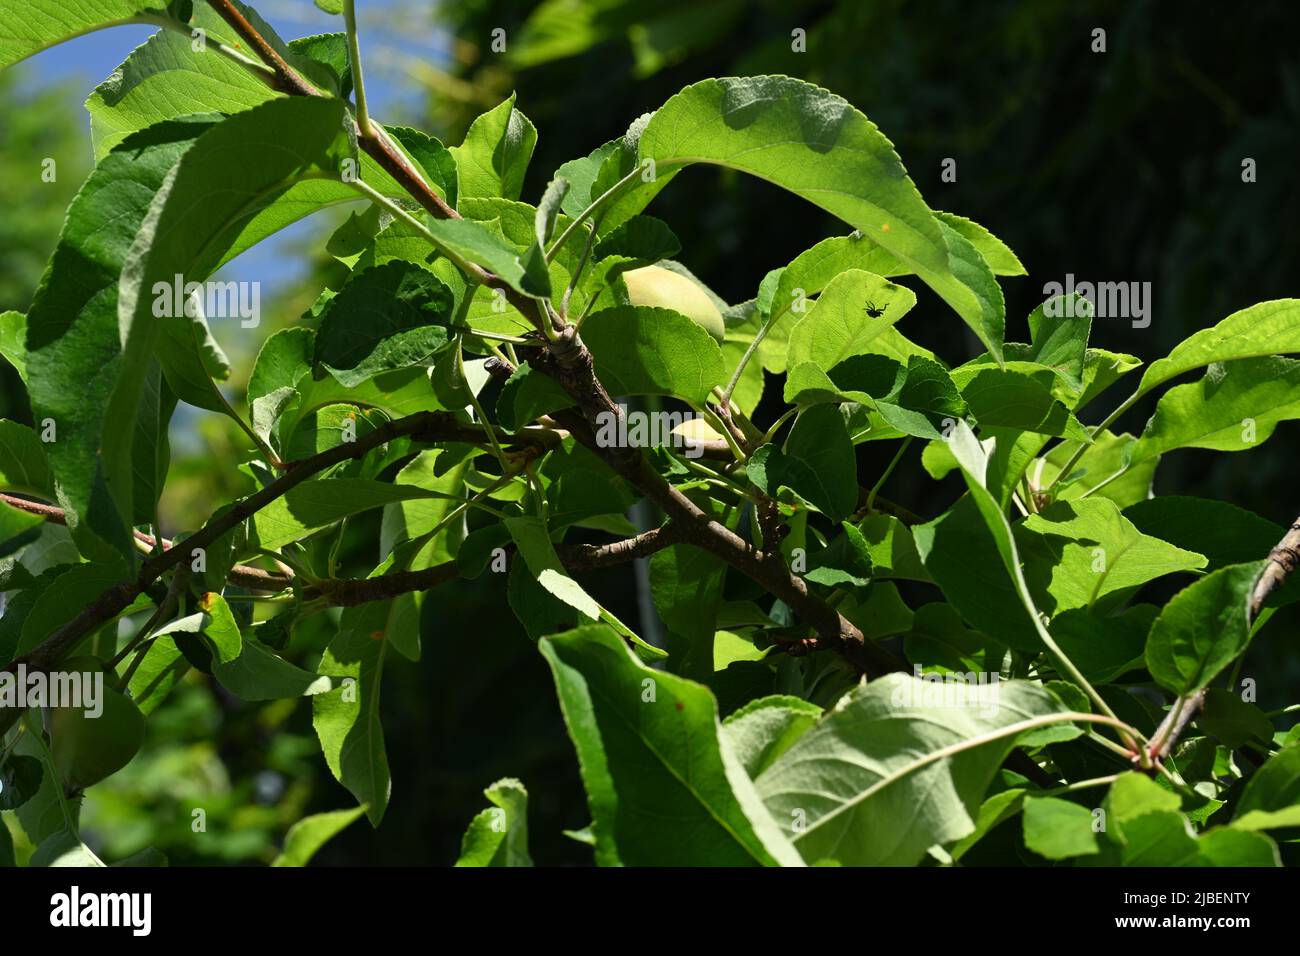 Leaves from a Golden Delicious Apple Tree. Stock Photo